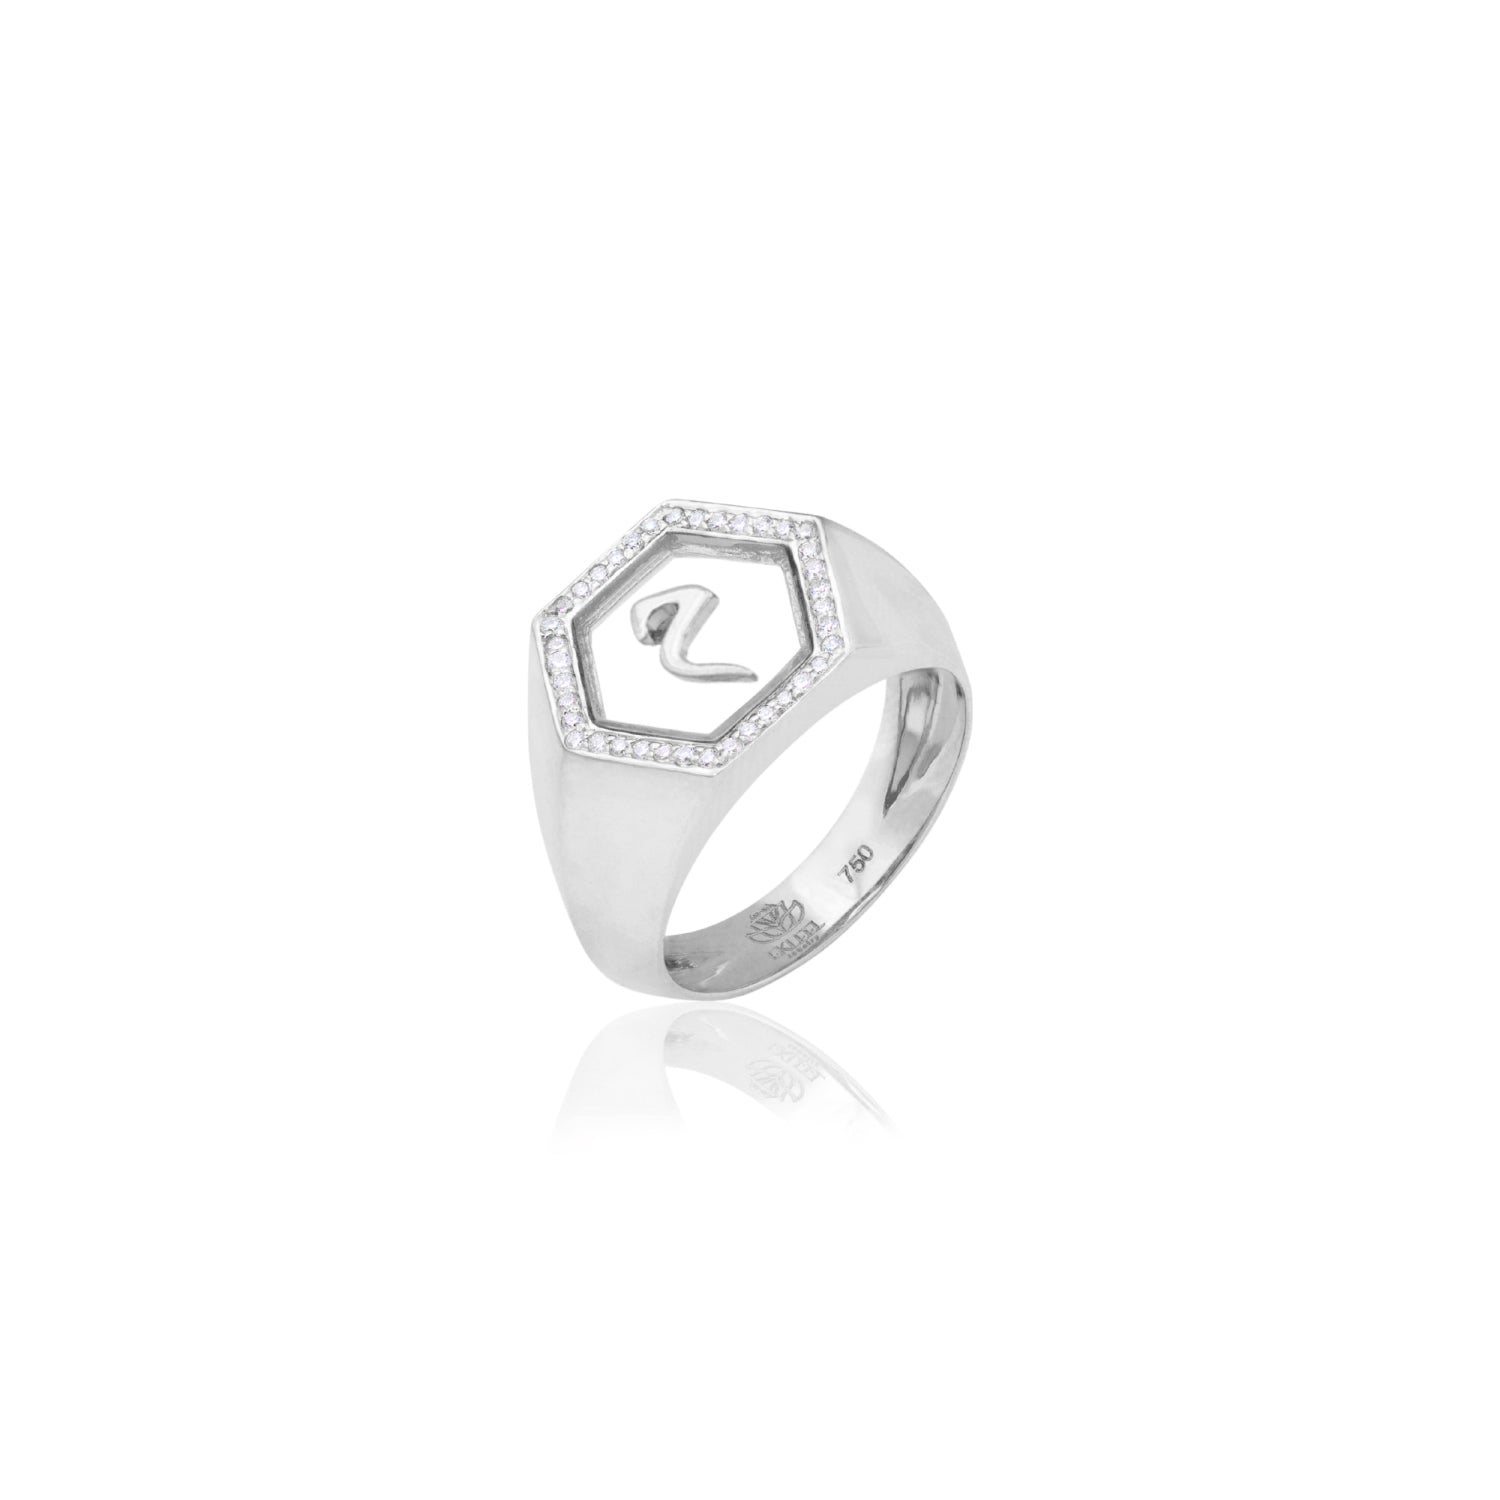 Qamoos 2.0 Letter م Plexiglass and Diamond Signet Ring in White Gold